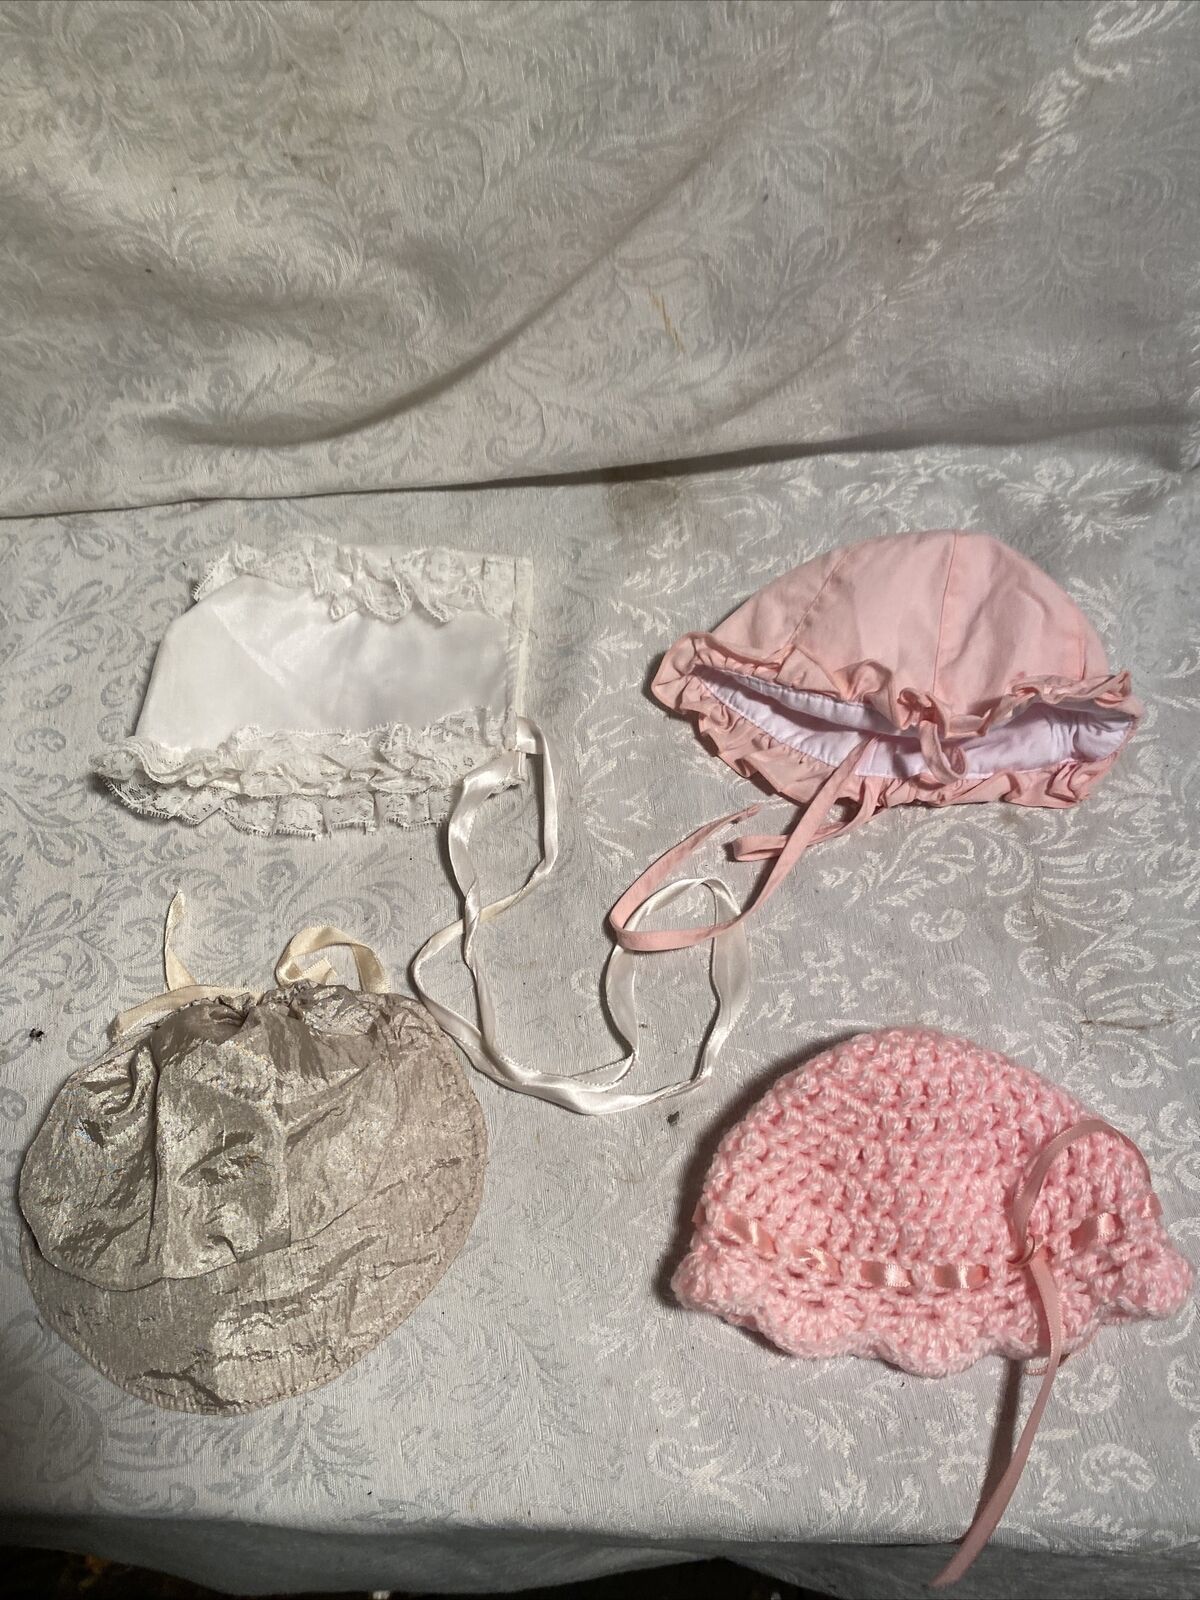 Vintage Lace Baby Or Doll Bonnet Cap Hat Christening Lot Of 4 #3